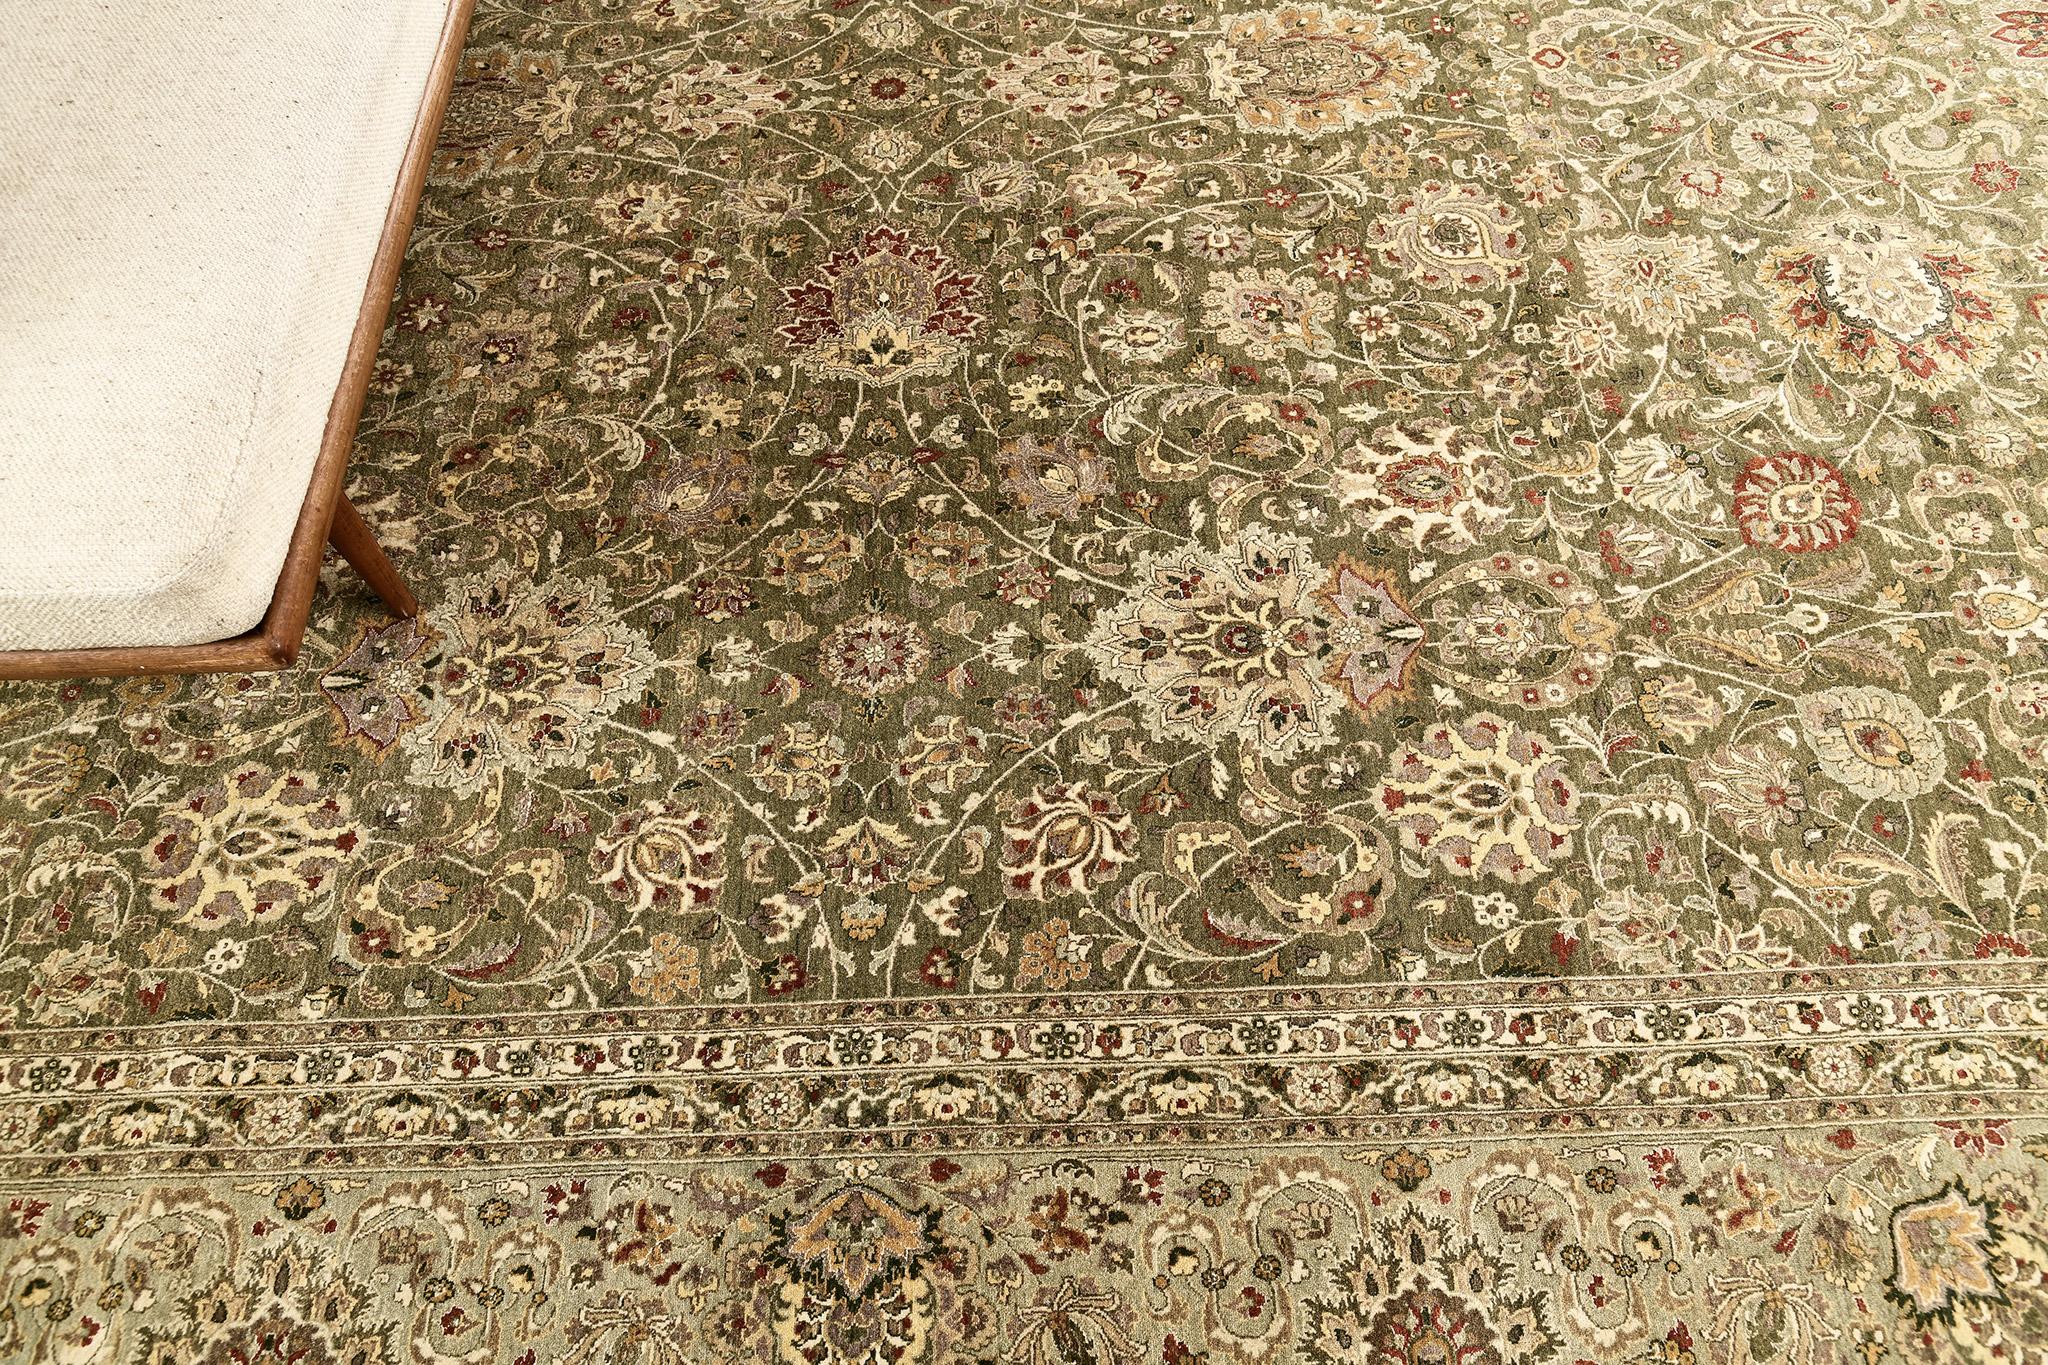 An exceptional revival of Hadji Jalili Natural Dye Tabriz rug that immensely encompasses the beautiful blooming scrolls and traditional Persian designs in a forest green field that keeps  the pattern very distinctive. This rug is suitable for both